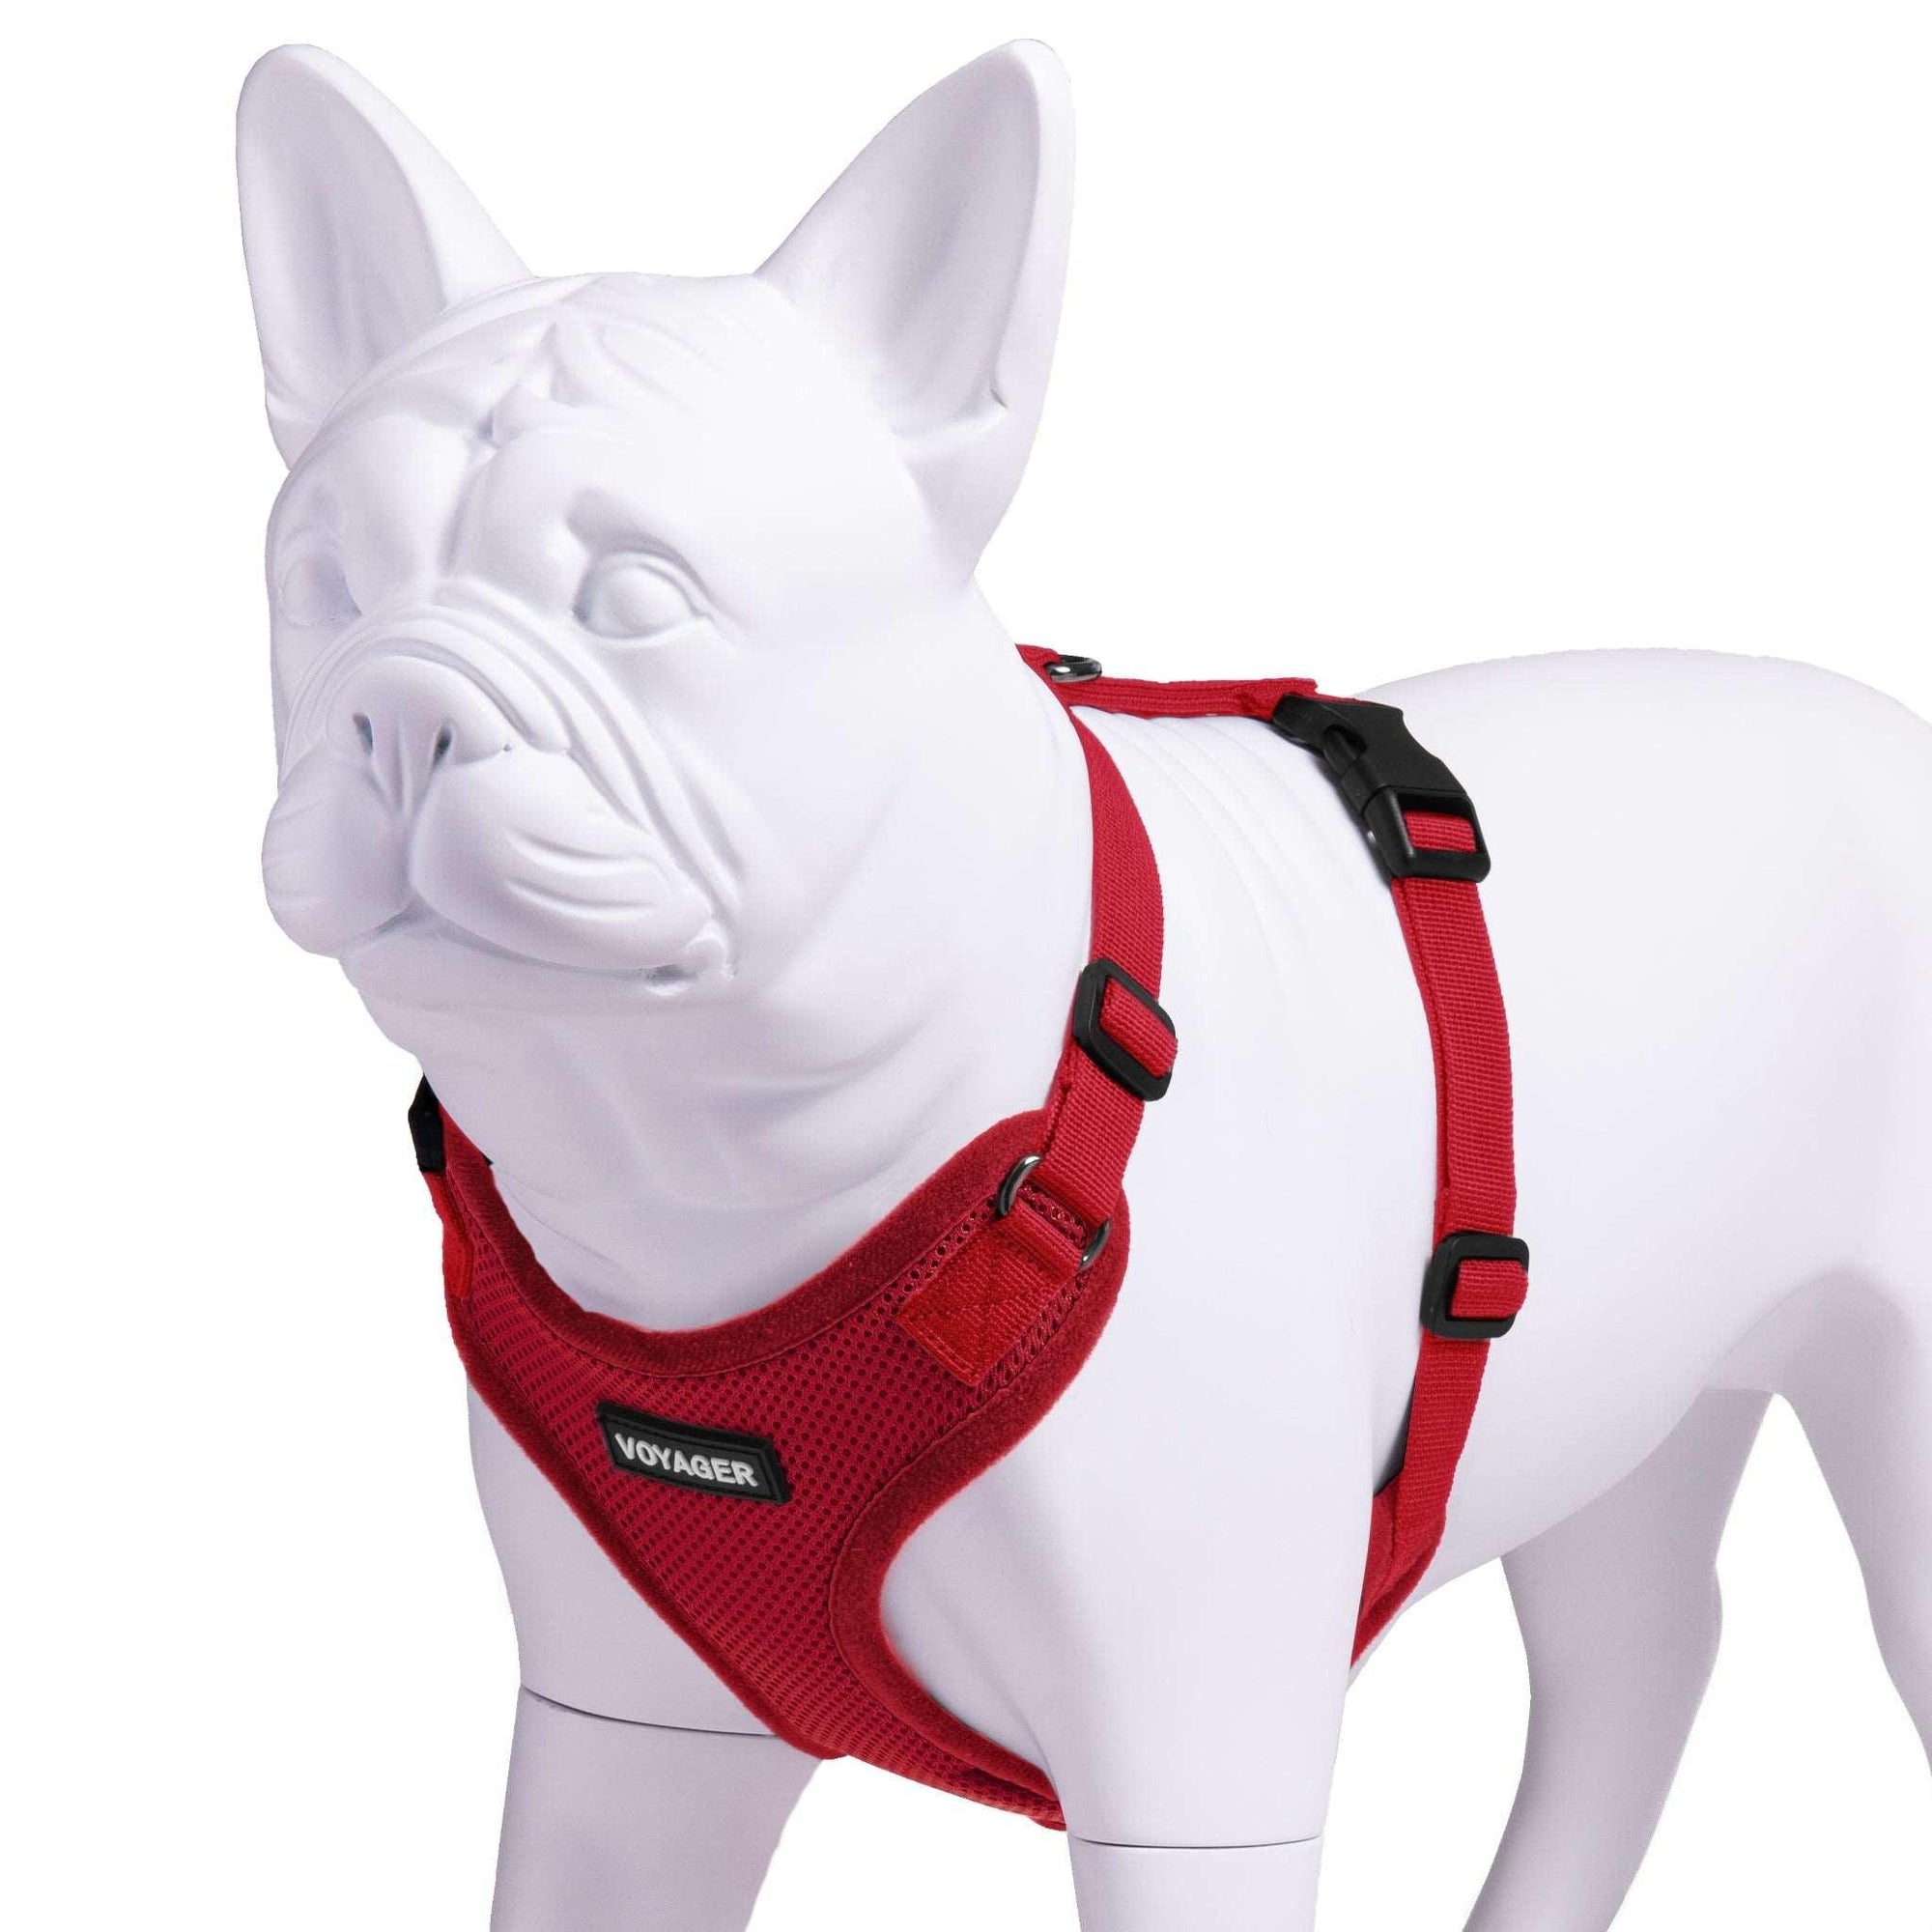 VOYAGER Step-In Lock Dog Harness in Red with Matching Trim and Webbing - Expanded